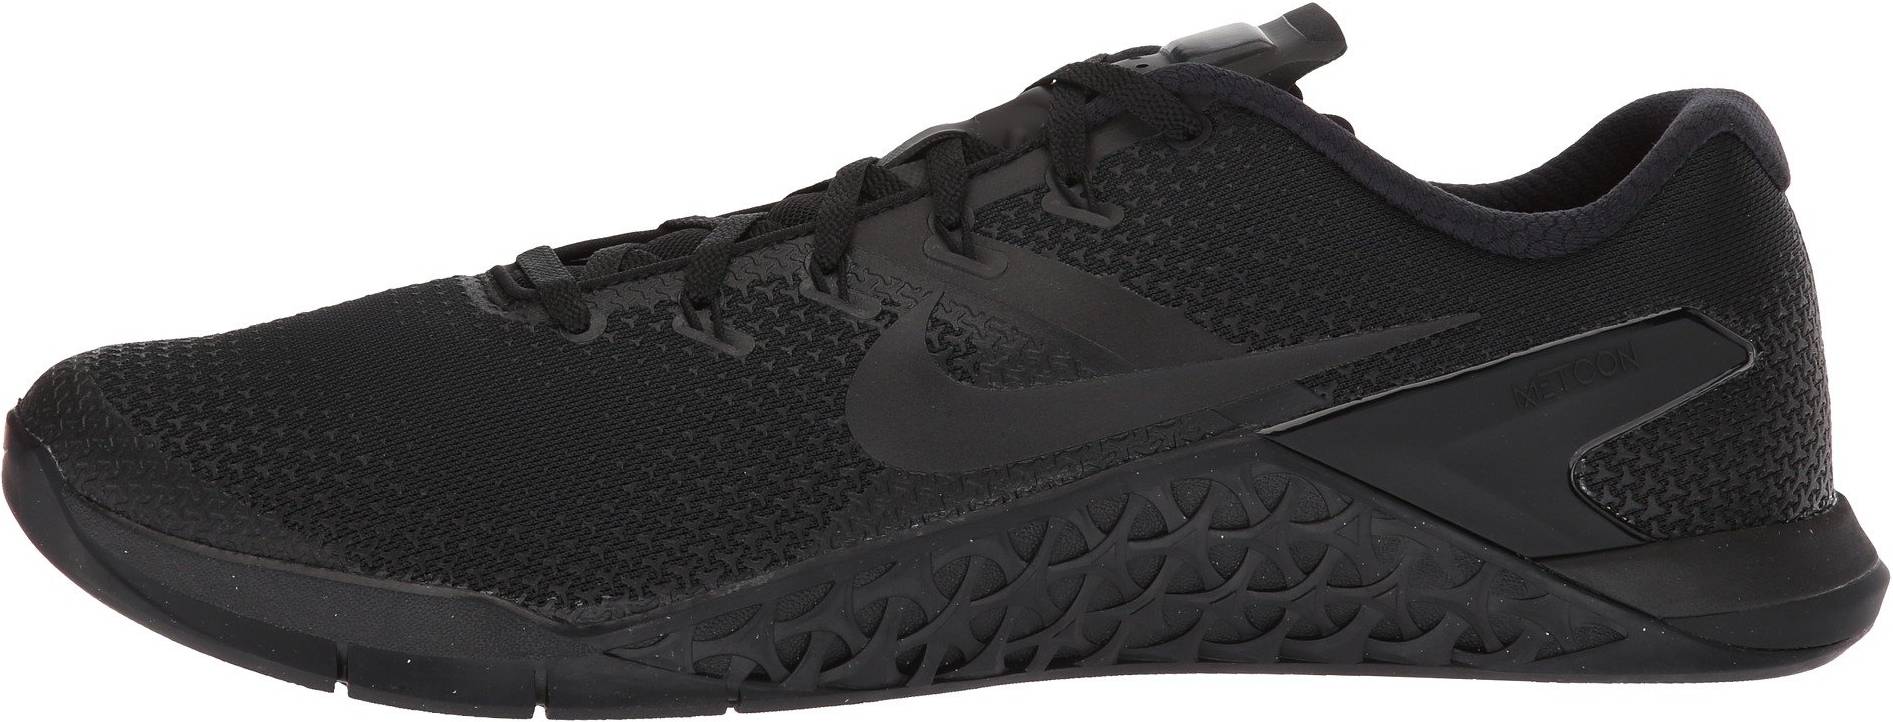 best nikes for lifting